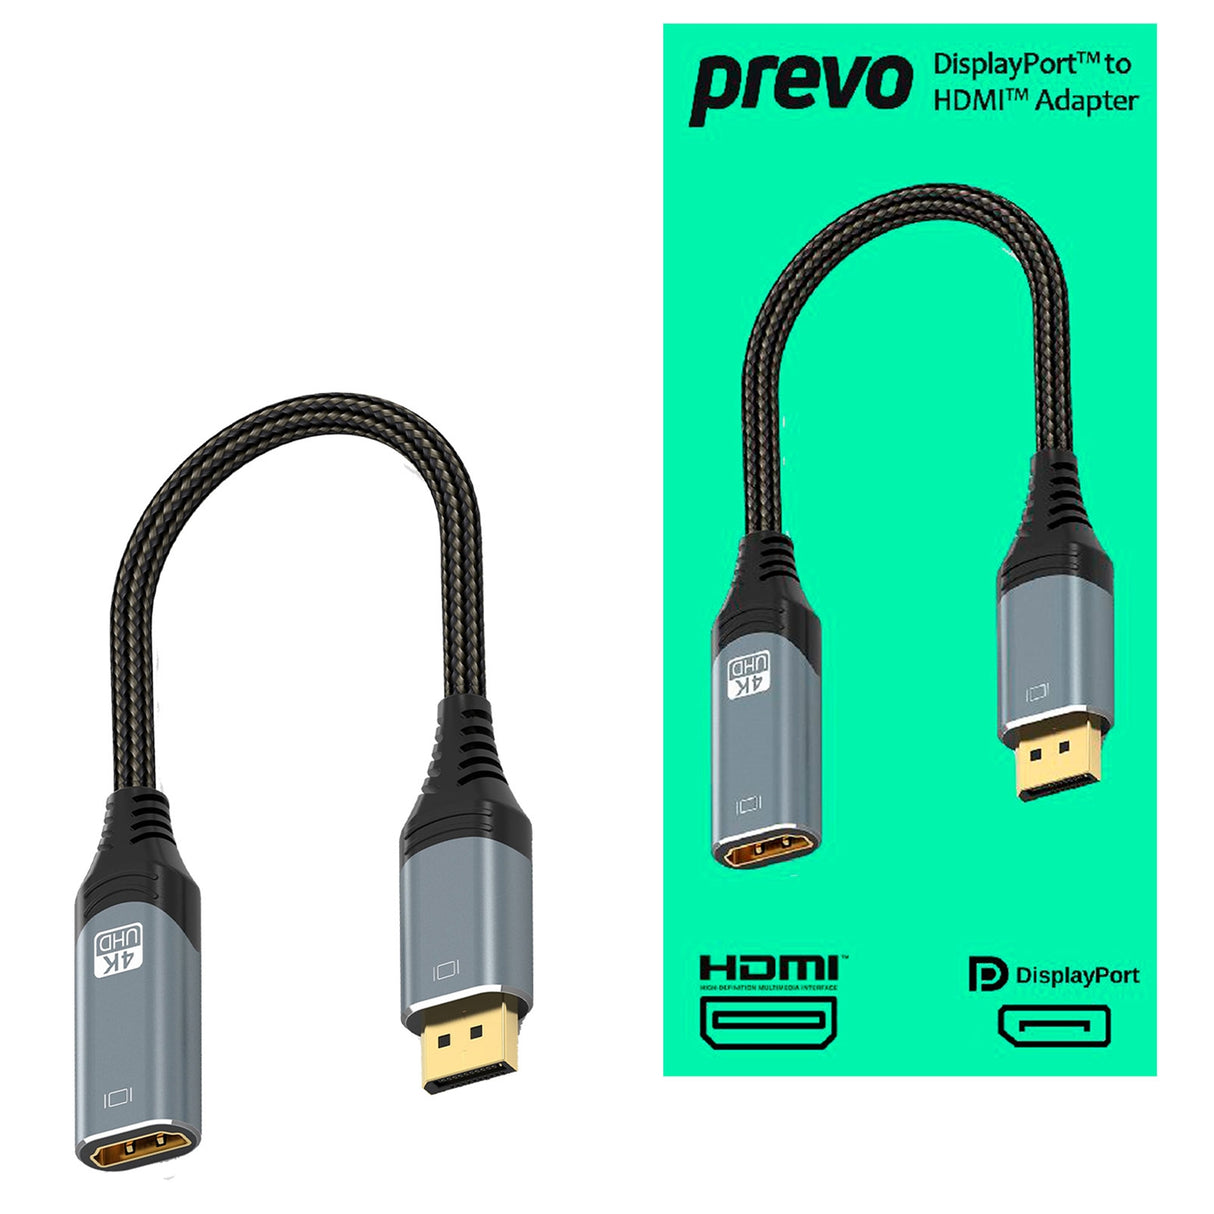 Prevo DPM-HDMIF-ADA Display Converter Adapter, DisplayPort (M) to HDMI (F), 0.2m, Black & Silver, DisplayPort 1.4 & HDMI 2.0, Supports up to 4K@60Hz, Braided Cable, Retail Box Packaging